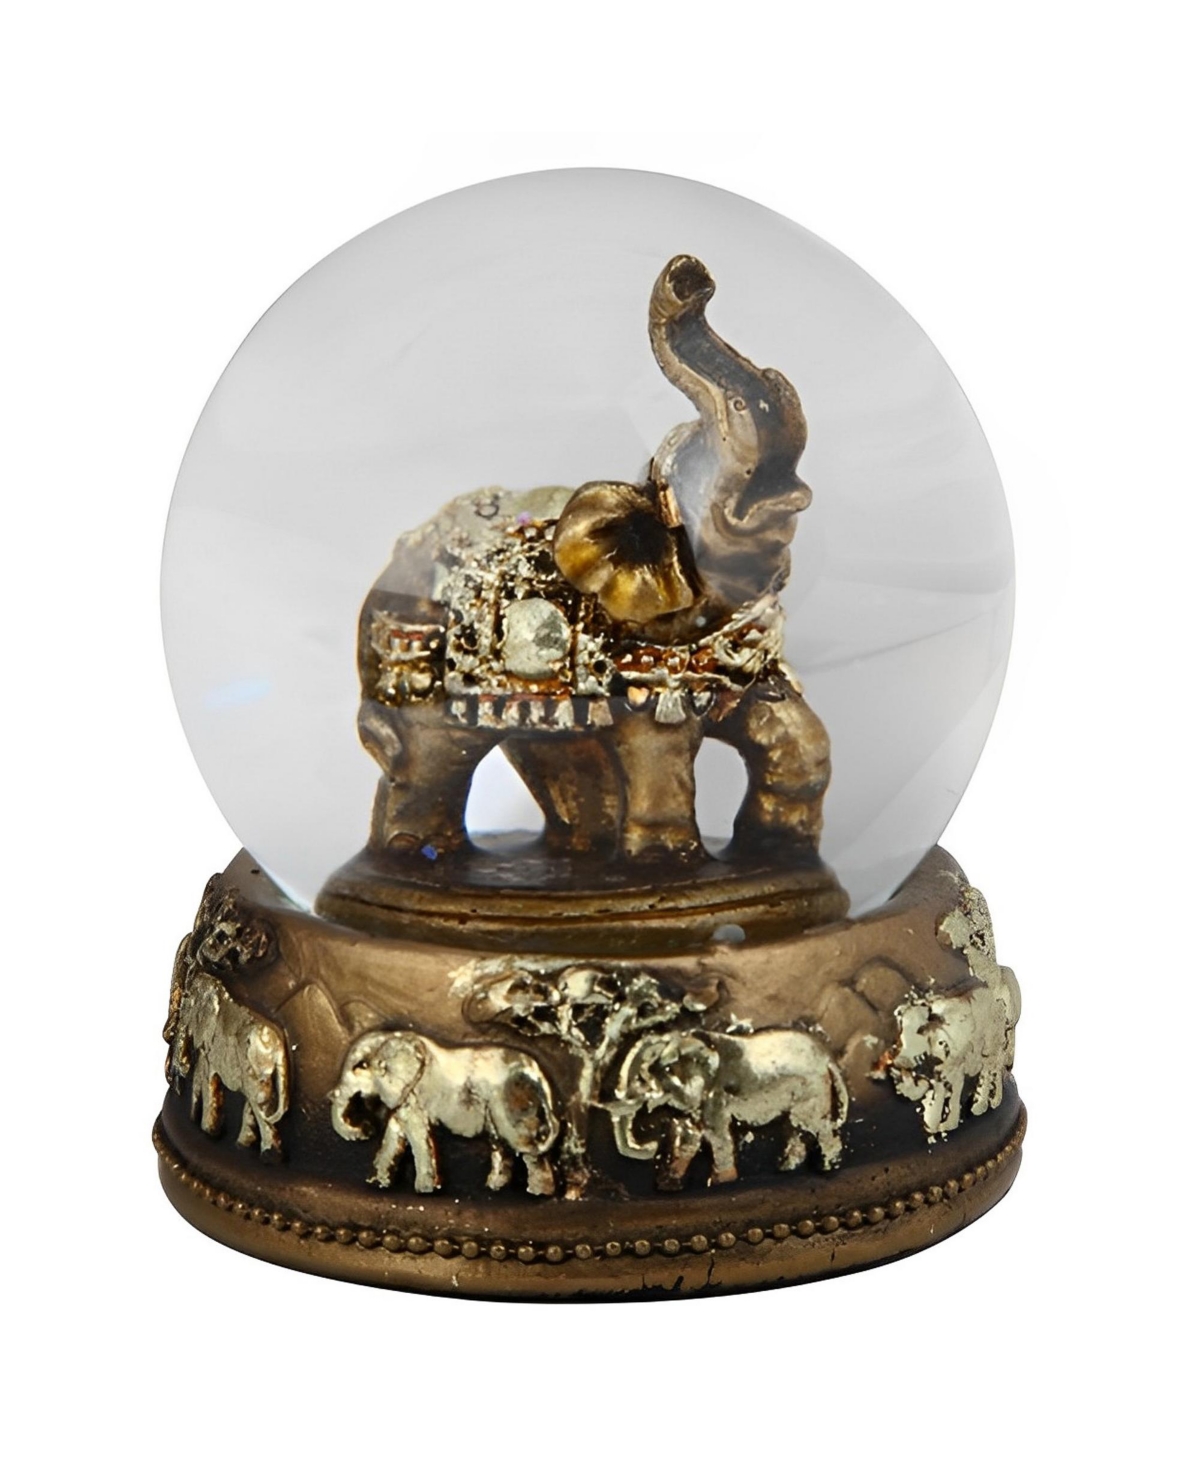 3"H Bronze Thai Elephant Glitter Snow Globe Figurine Home Decor Perfect Gift for House Warming, Holidays and Birthdays - Multicolor